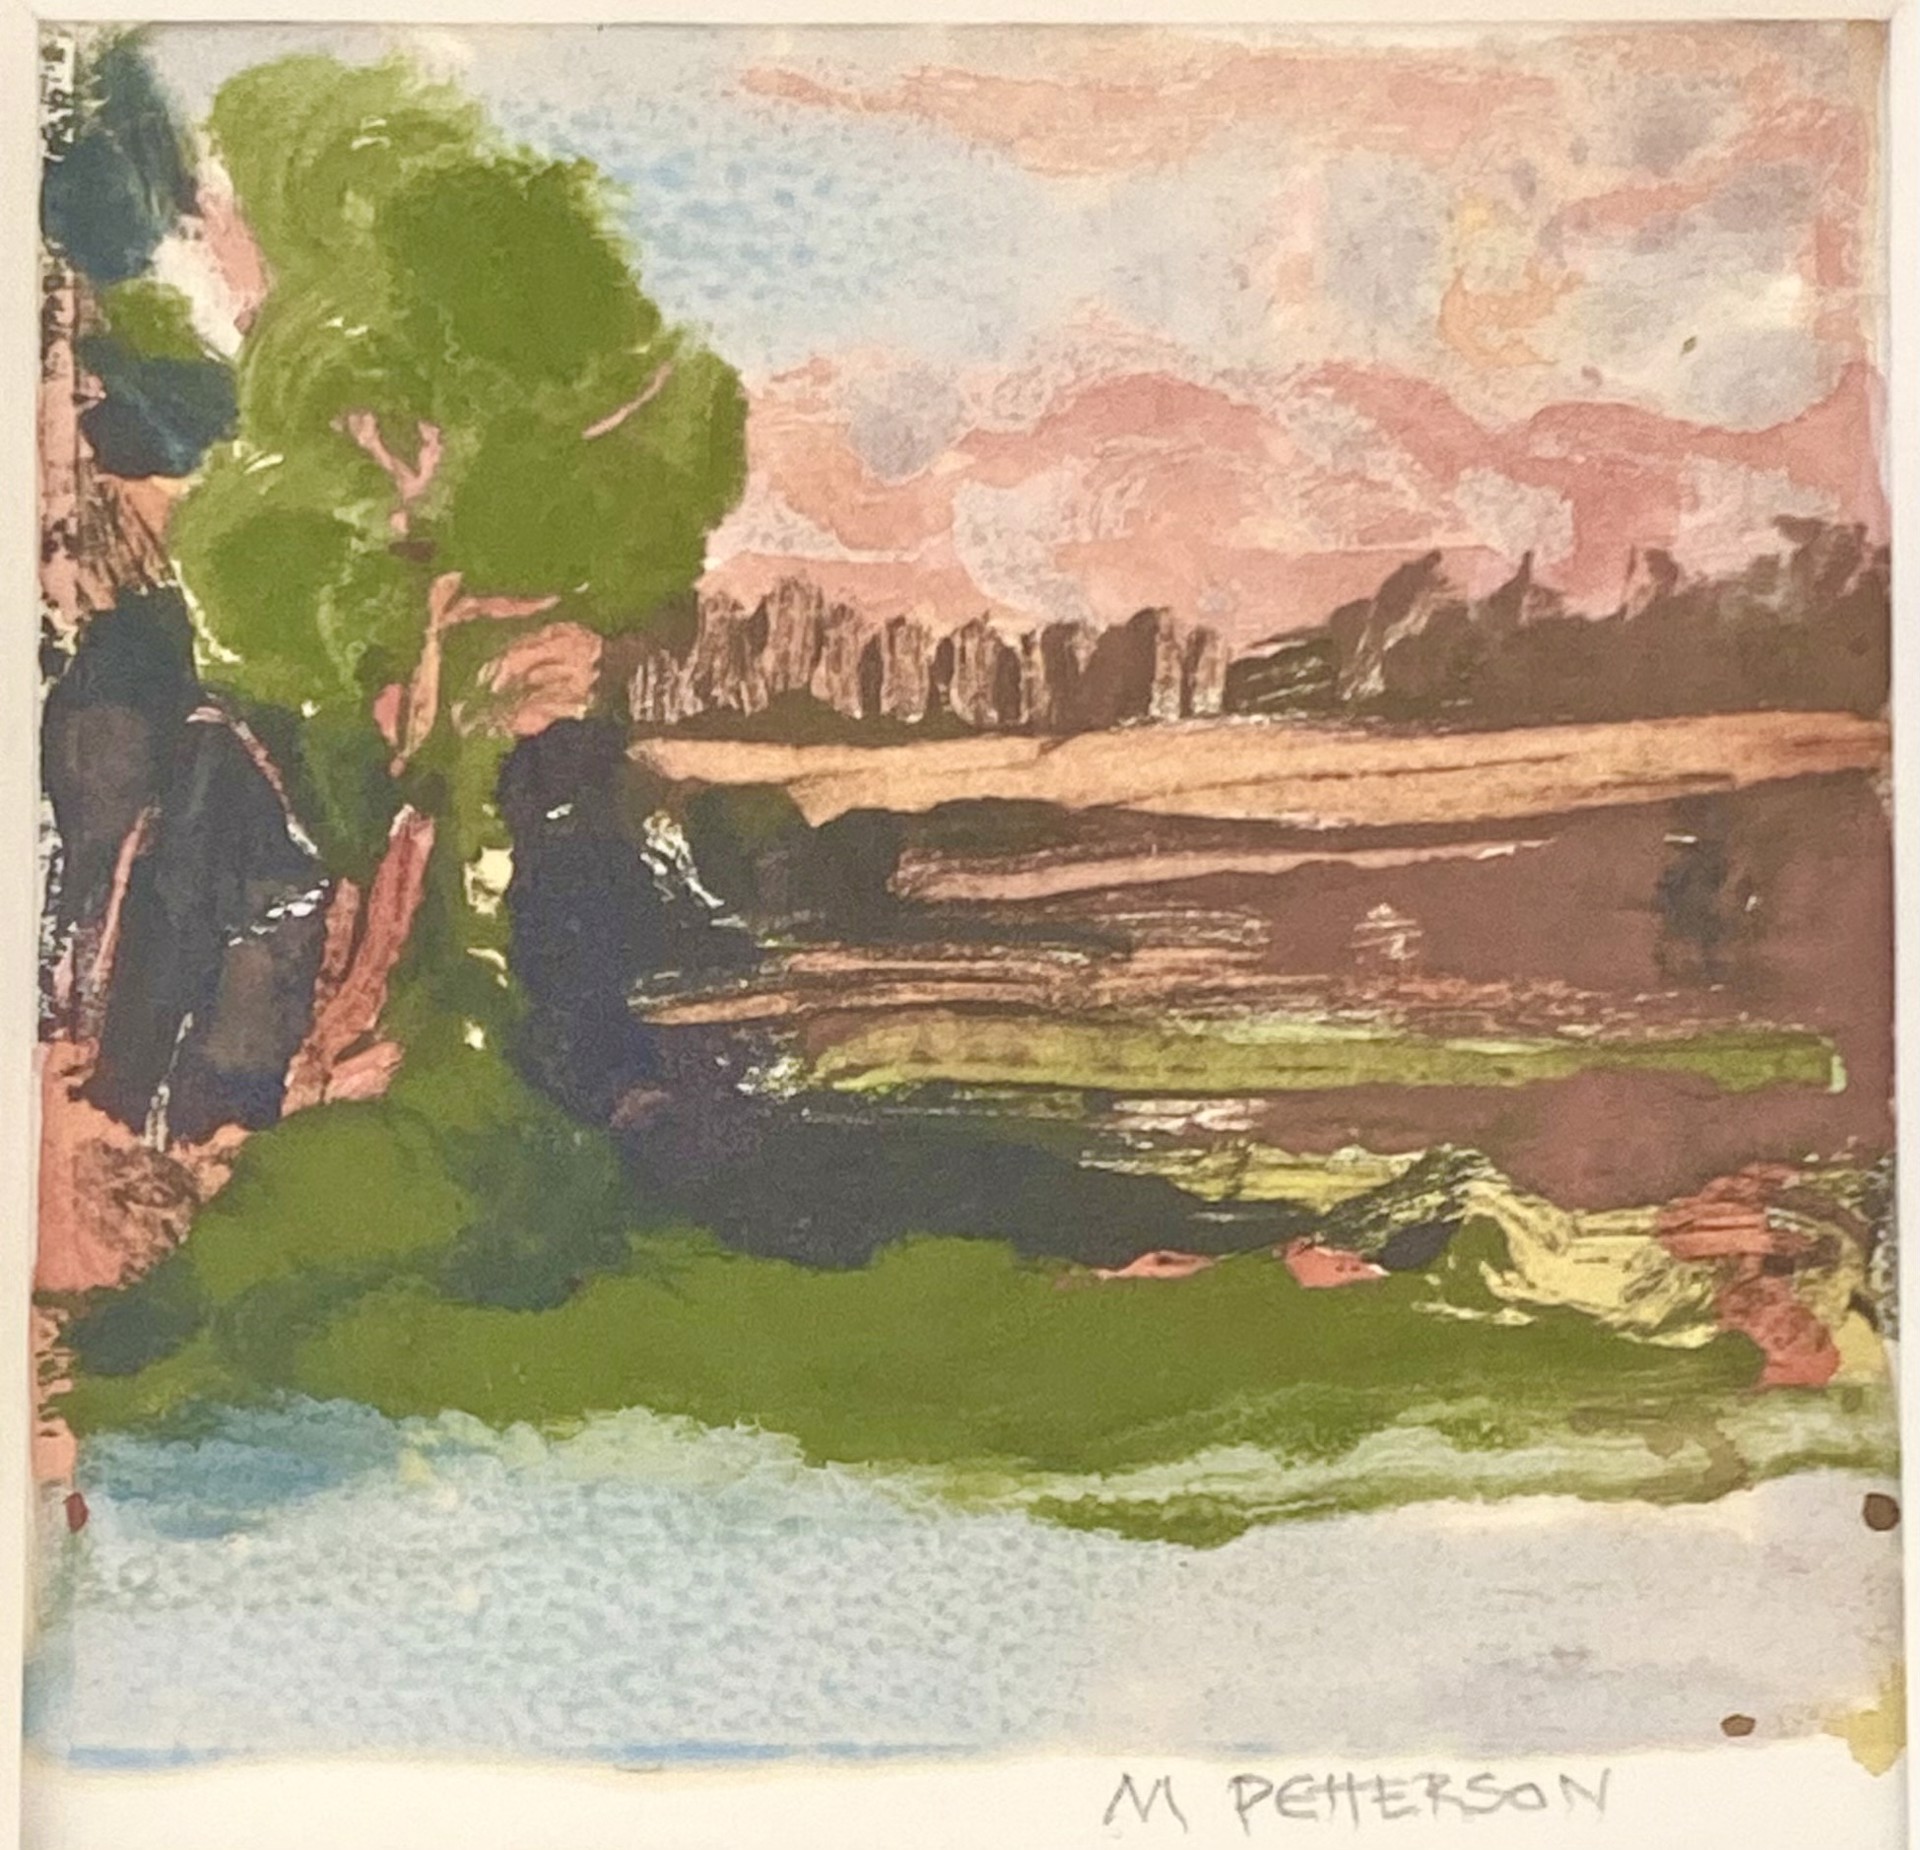 Lowcountry Marsh Study by Margaret Petterson